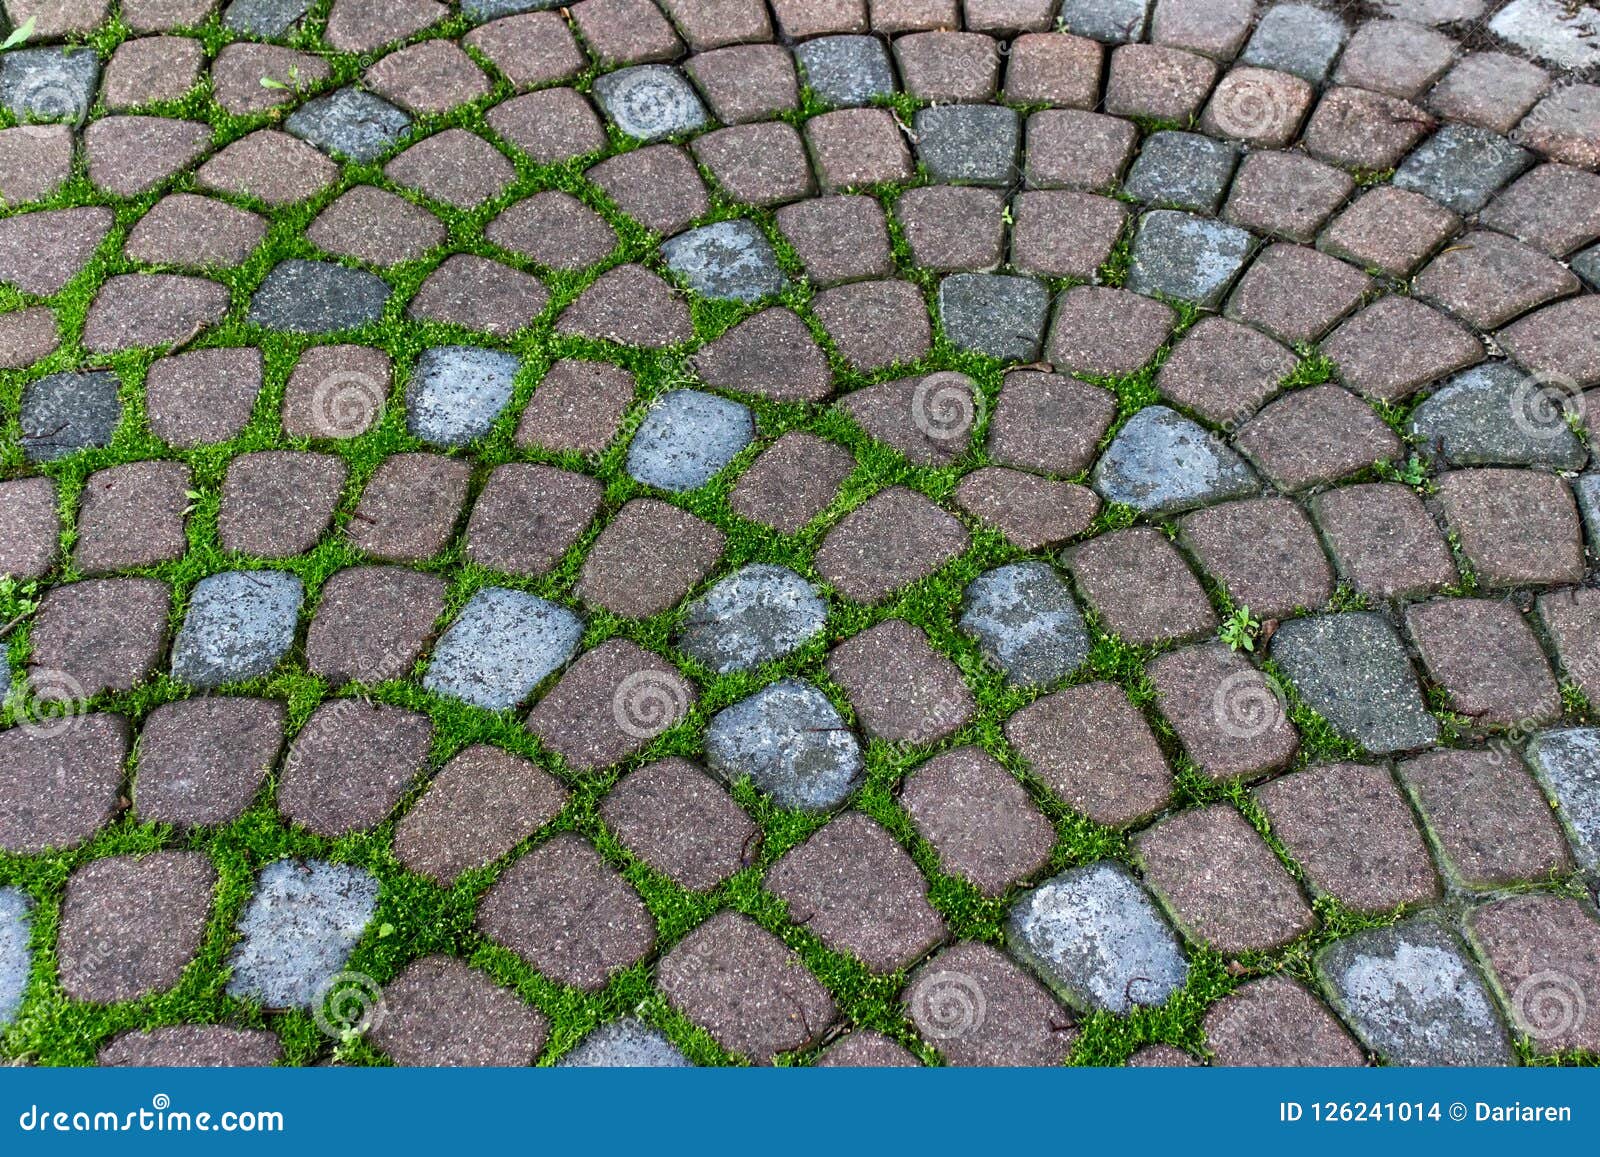 Decorative Garden Stone Pavement With Grooves Filled With Grass